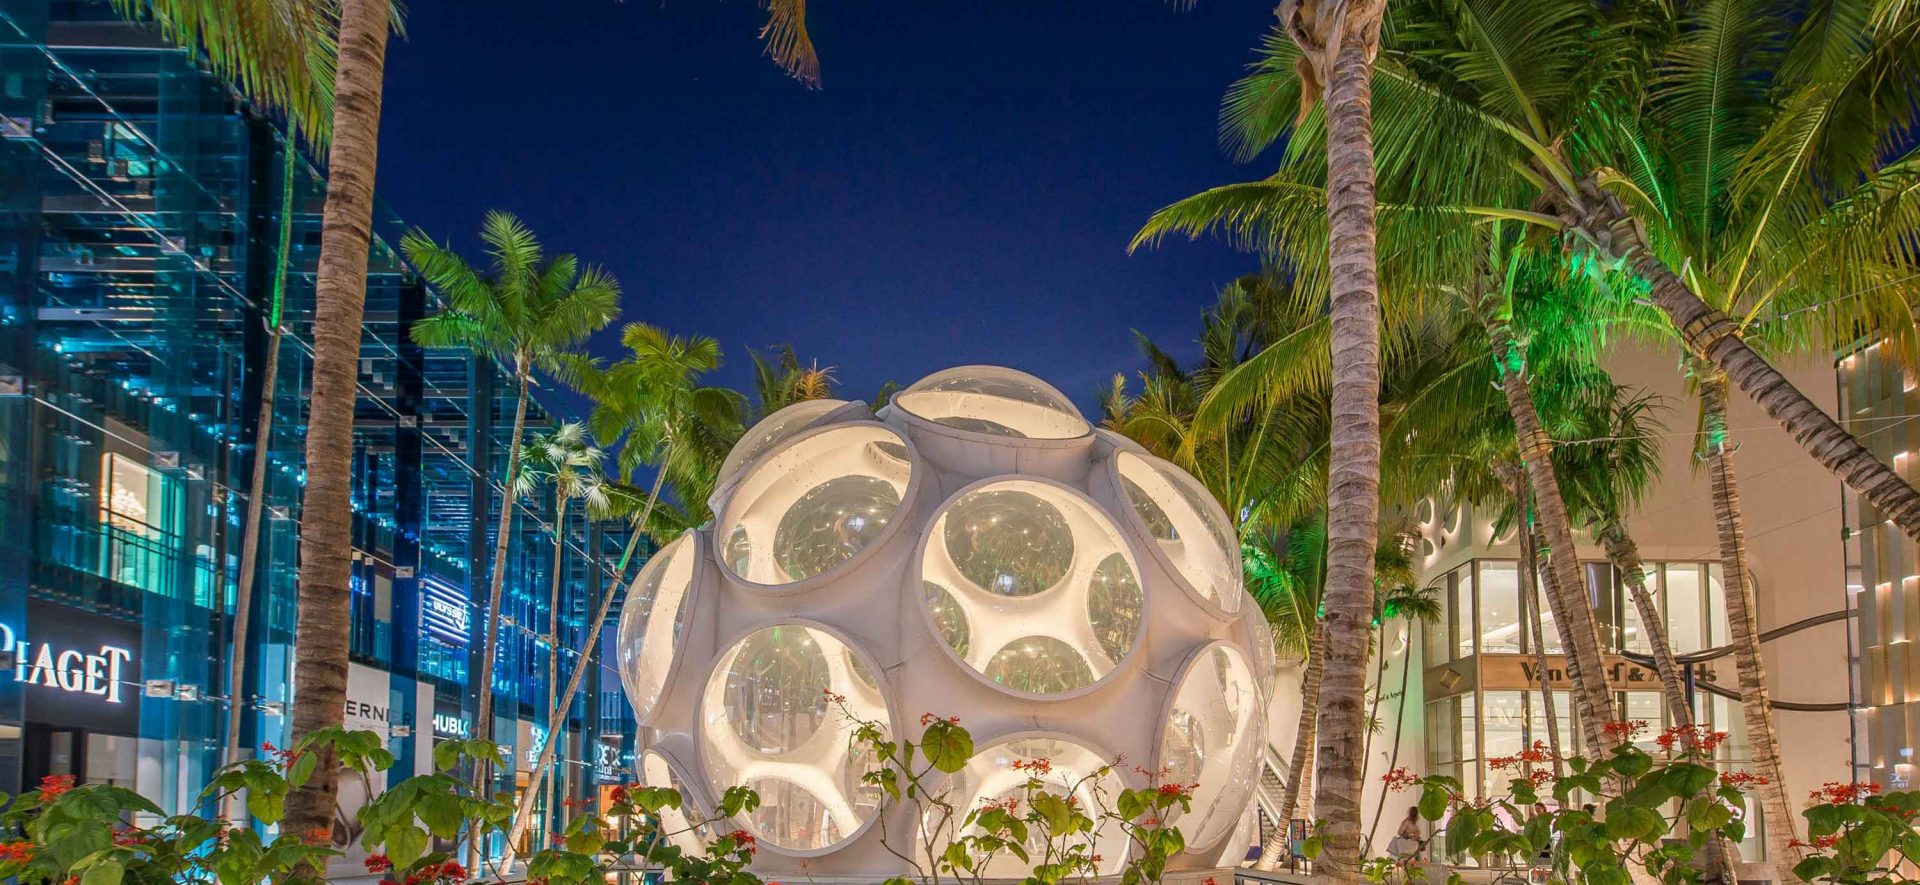 Public Art, Galleries and Showrooms at the Miami Design District